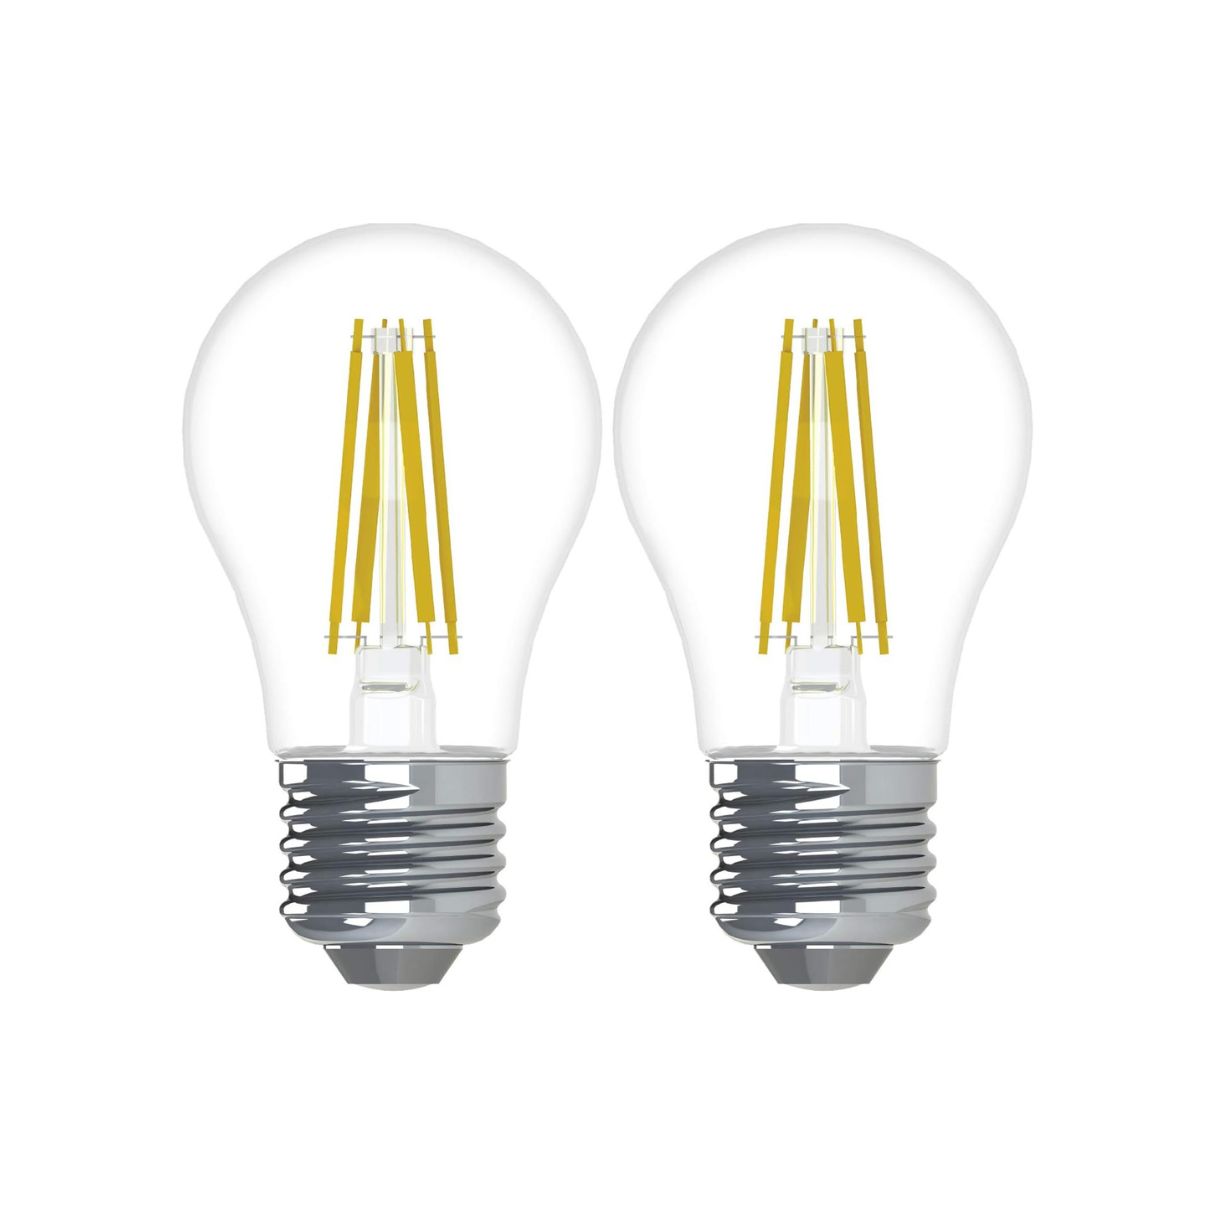 How Does A 3-Way Light Bulb Work?